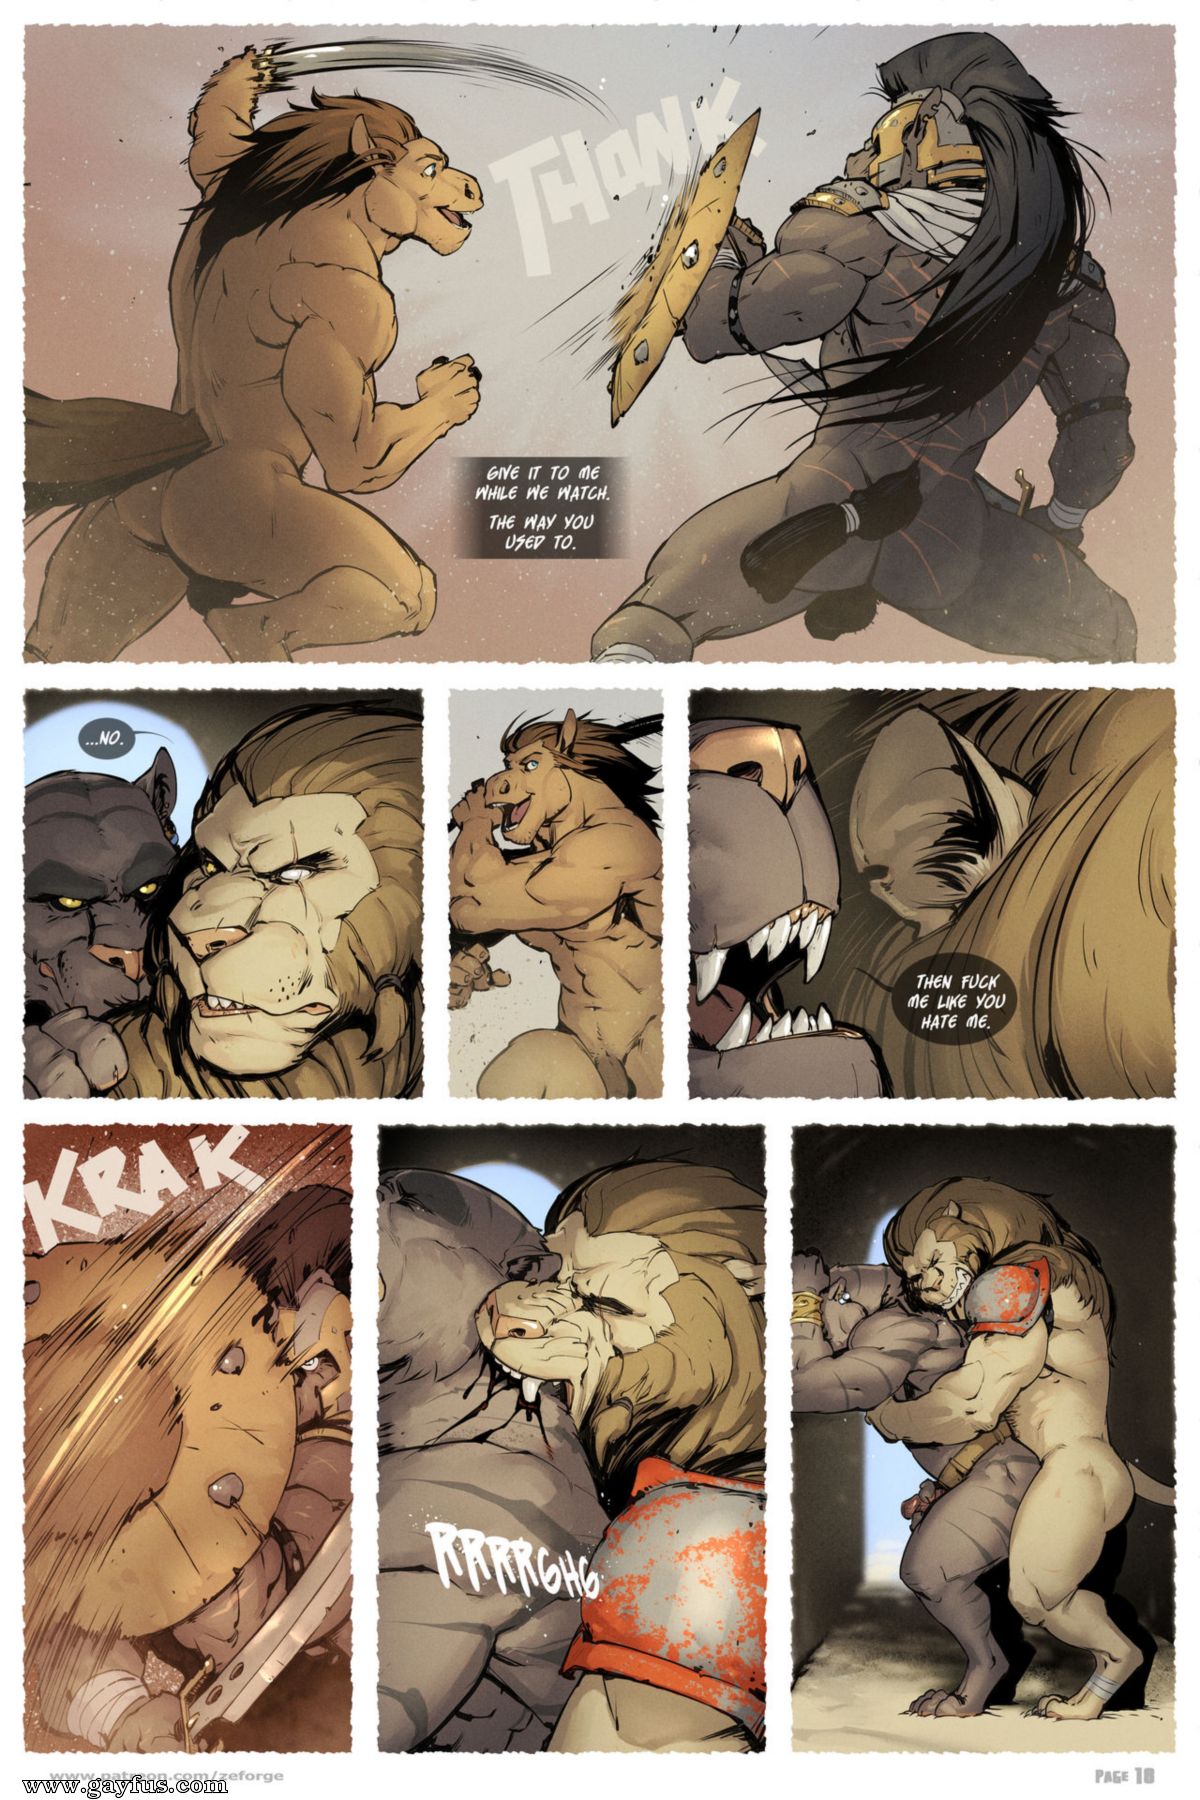 Gay Furry Horse Porn - Page 18 | Forgewielder/Horse-With-No-Name-Desmoterion | Gayfus - Gay Sex  and Porn Comics